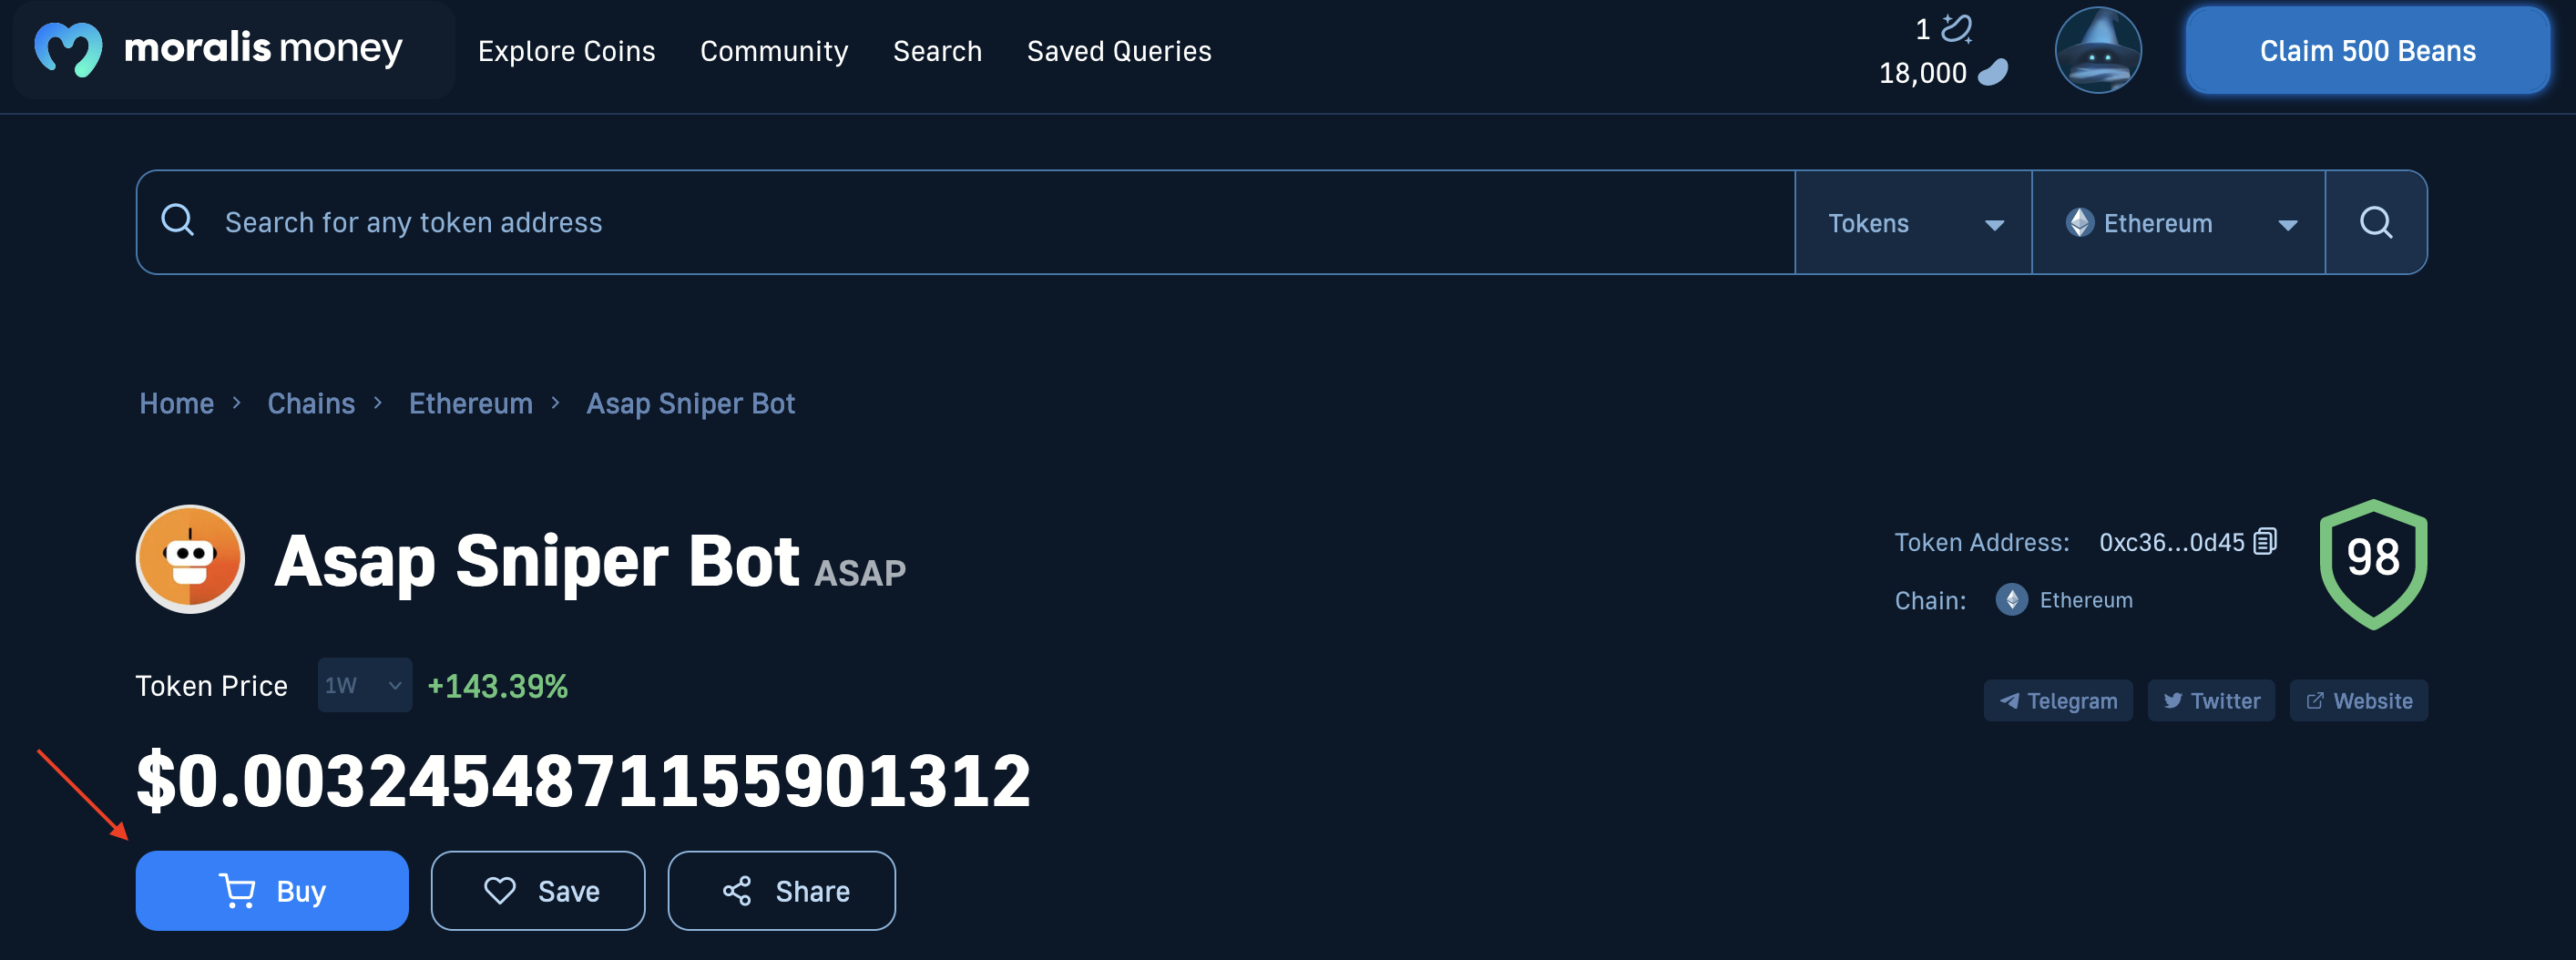 Arrow pointing at the "Buy" button to illustrate how to buy into the Asap Sniper Bot Crypto Coin